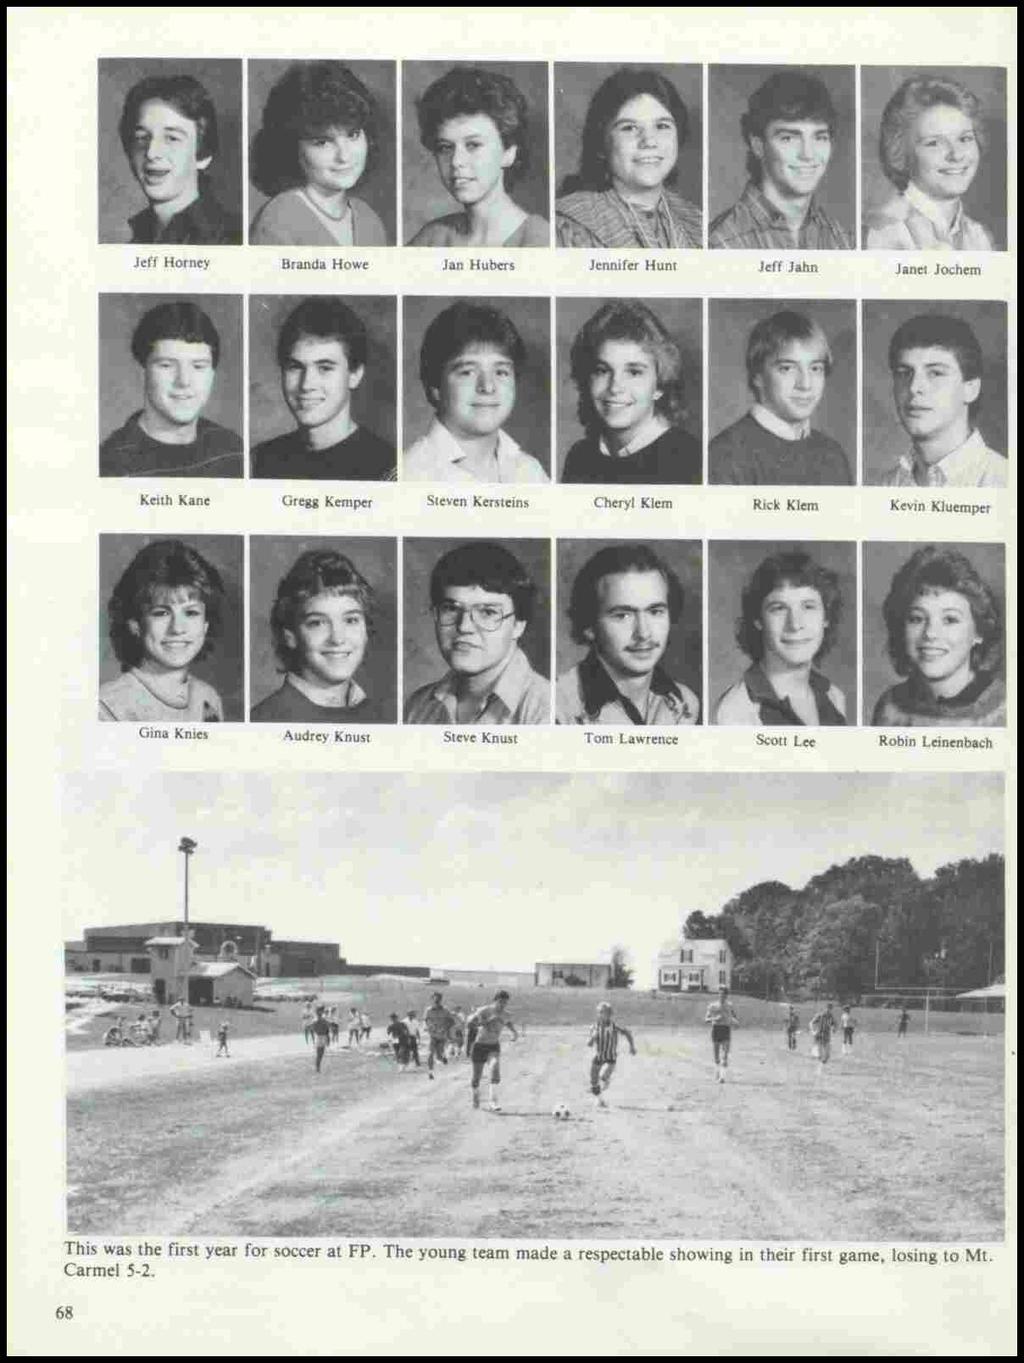 This was the first year for soccer at FP.